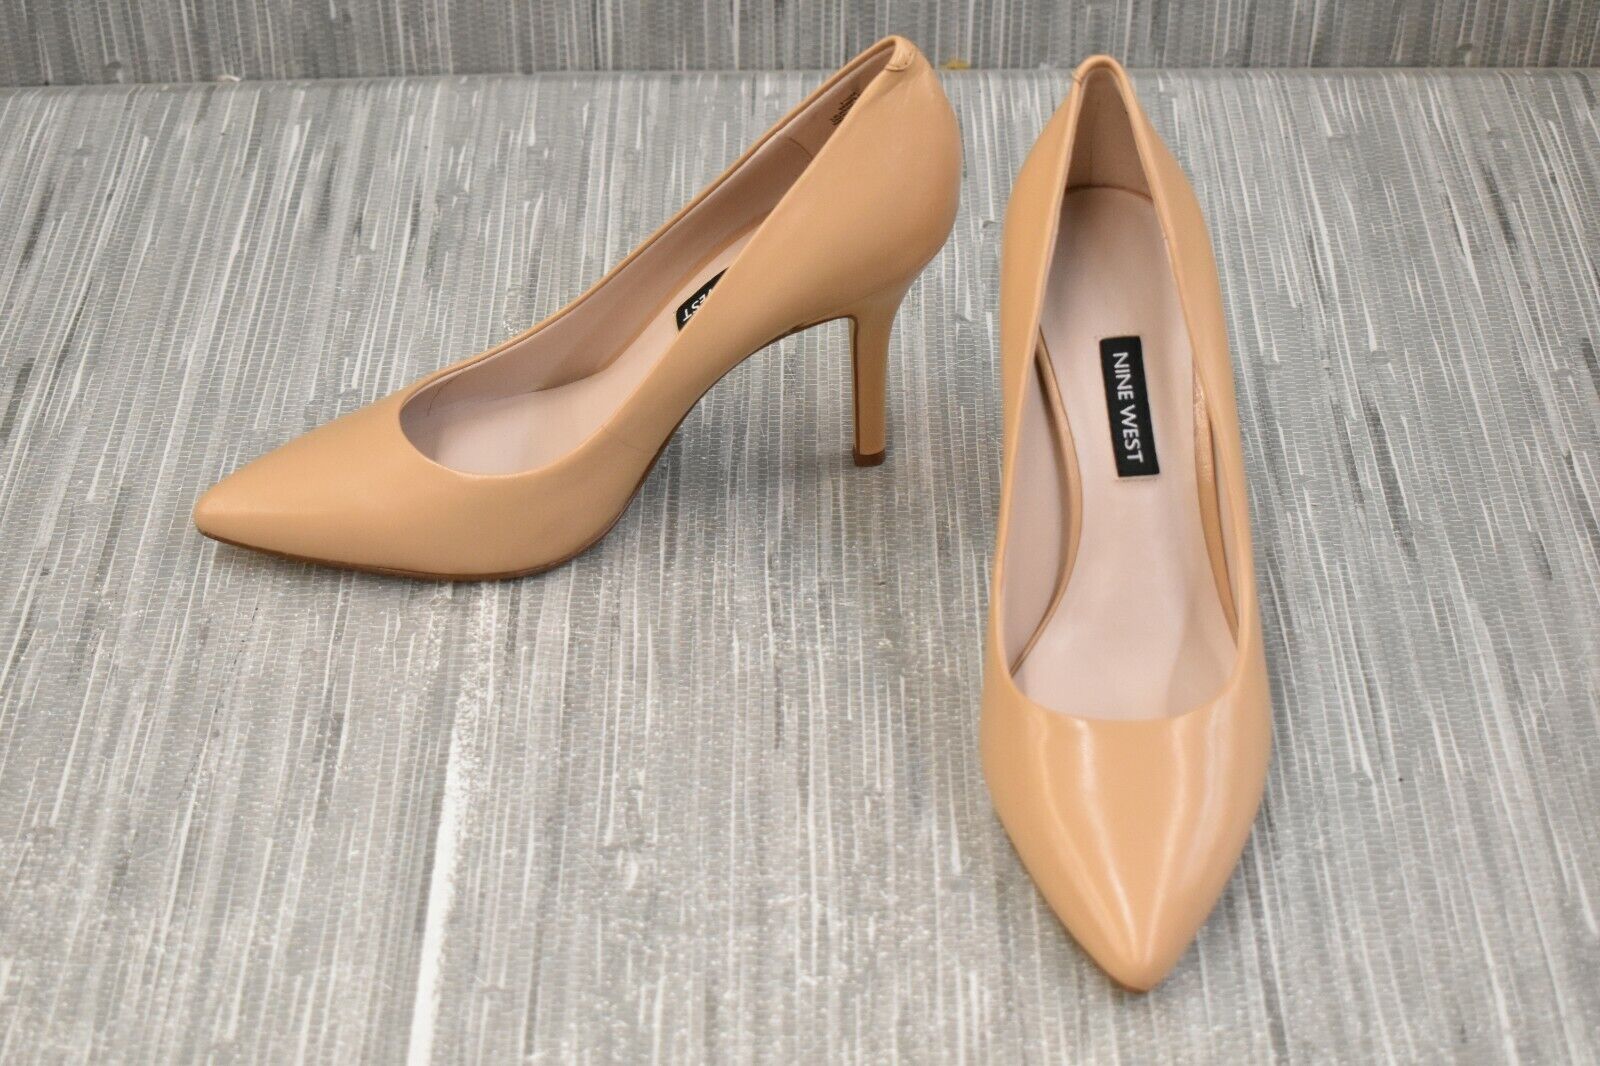 Nine West Flax Pointed Toe Leather Pumps, Women’s Size...